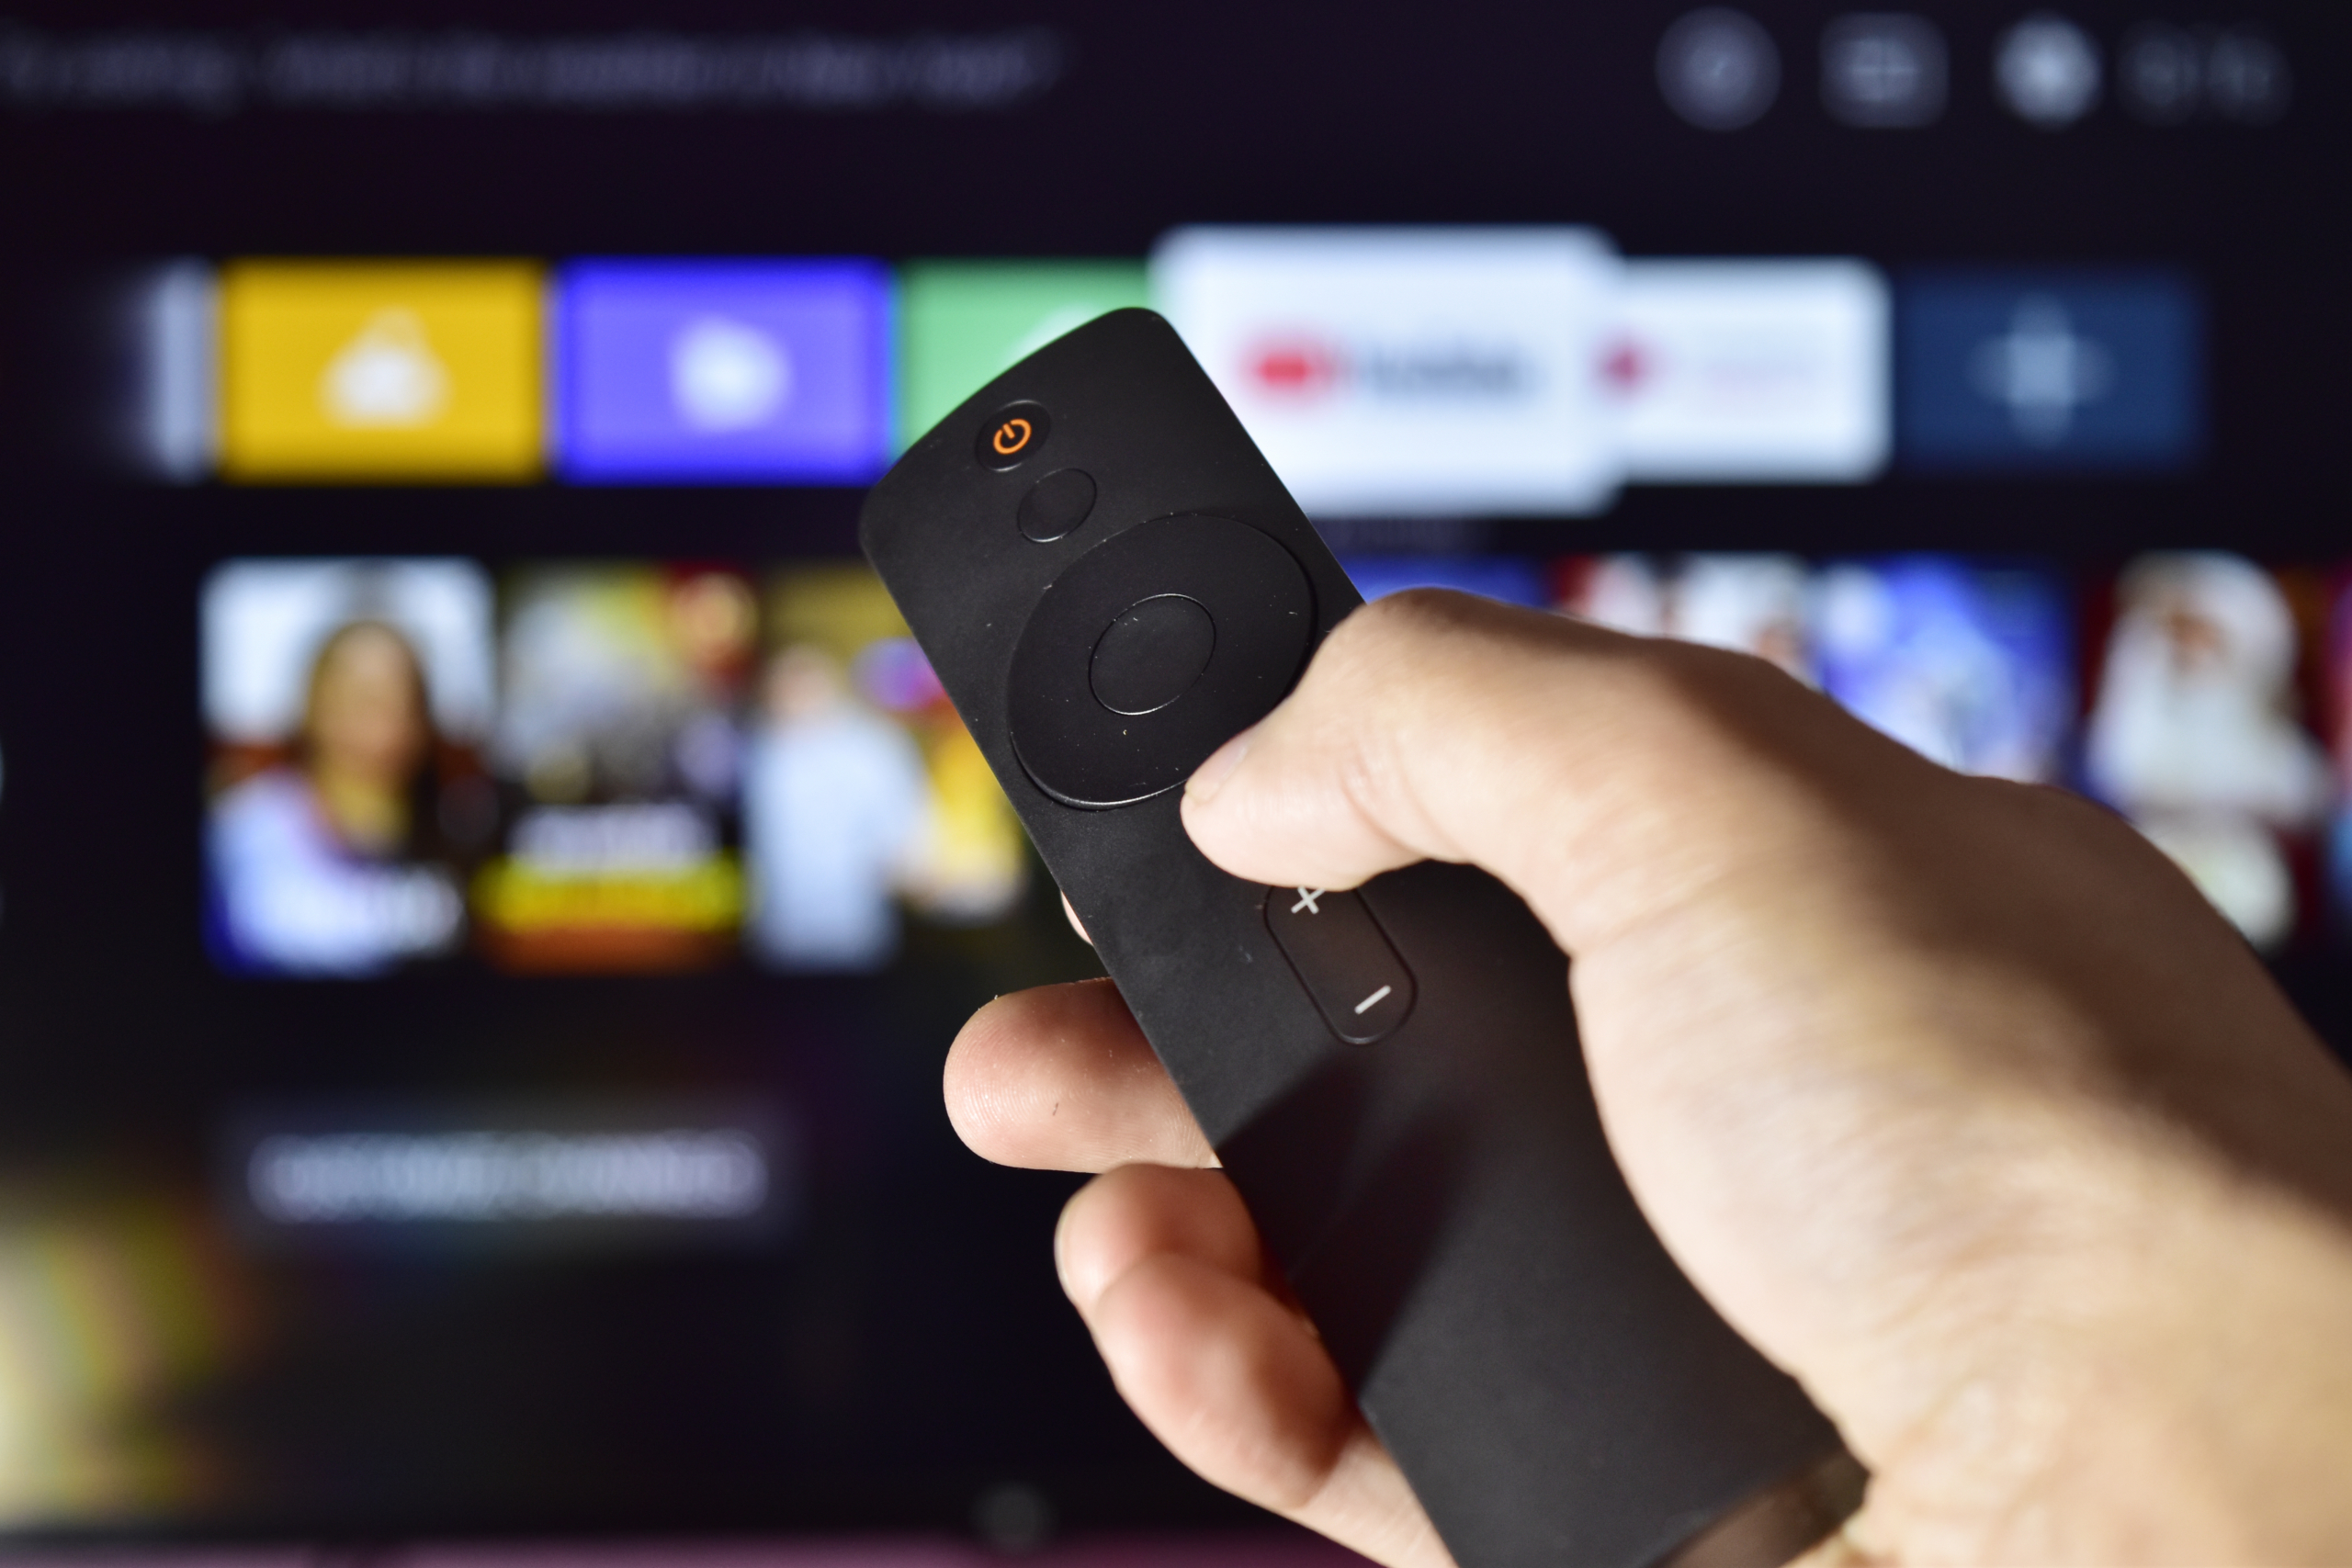 How To Get Activation Code For Netflix On Smart TV